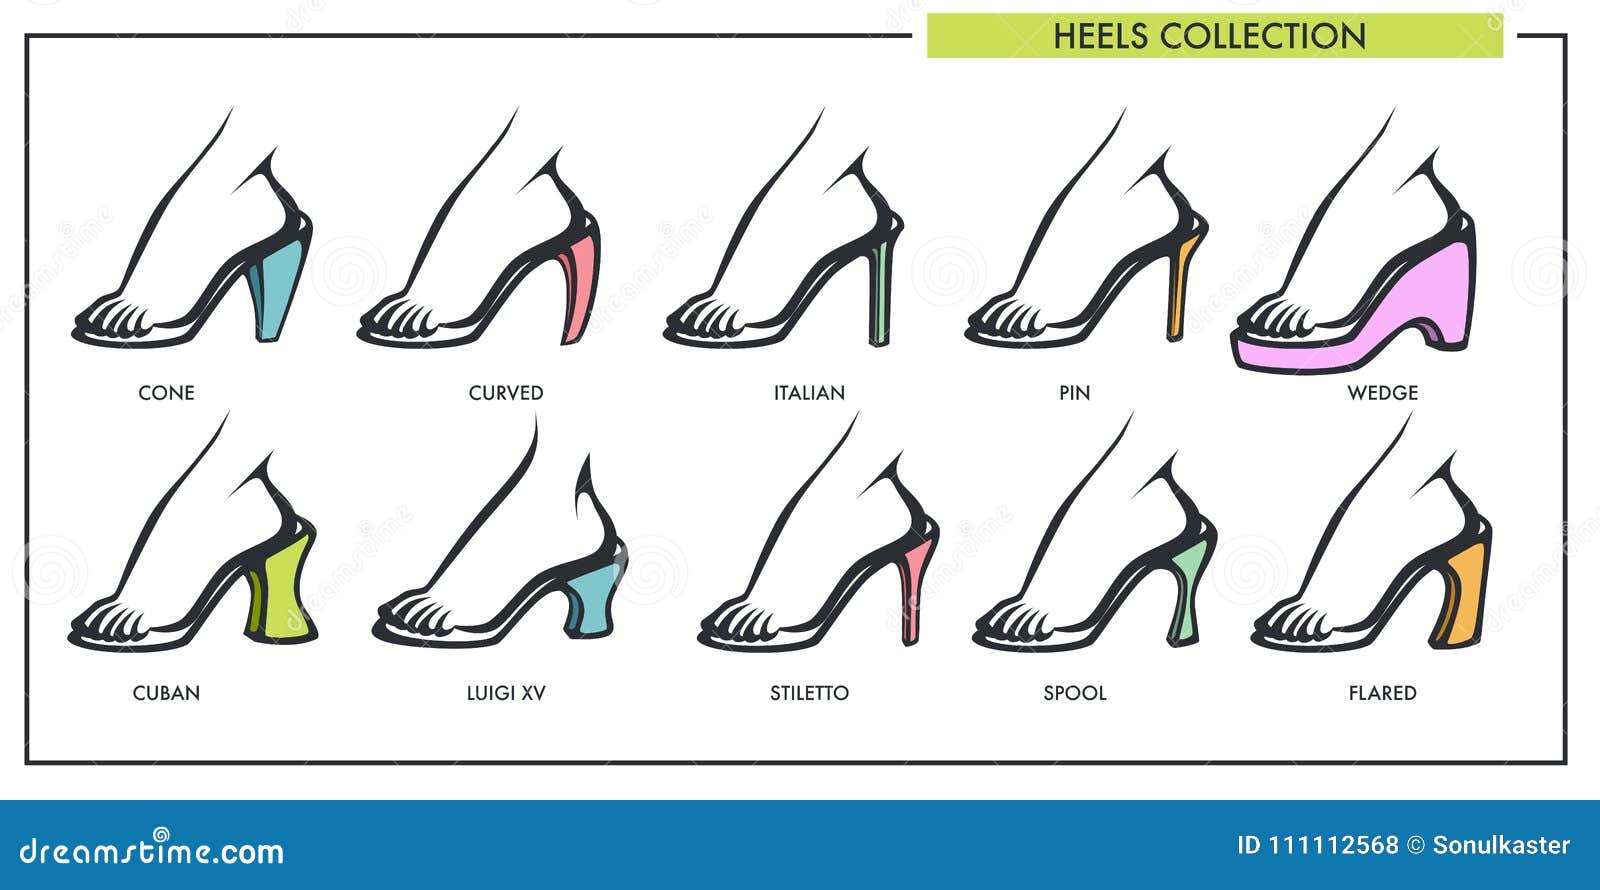 types of heels shoes